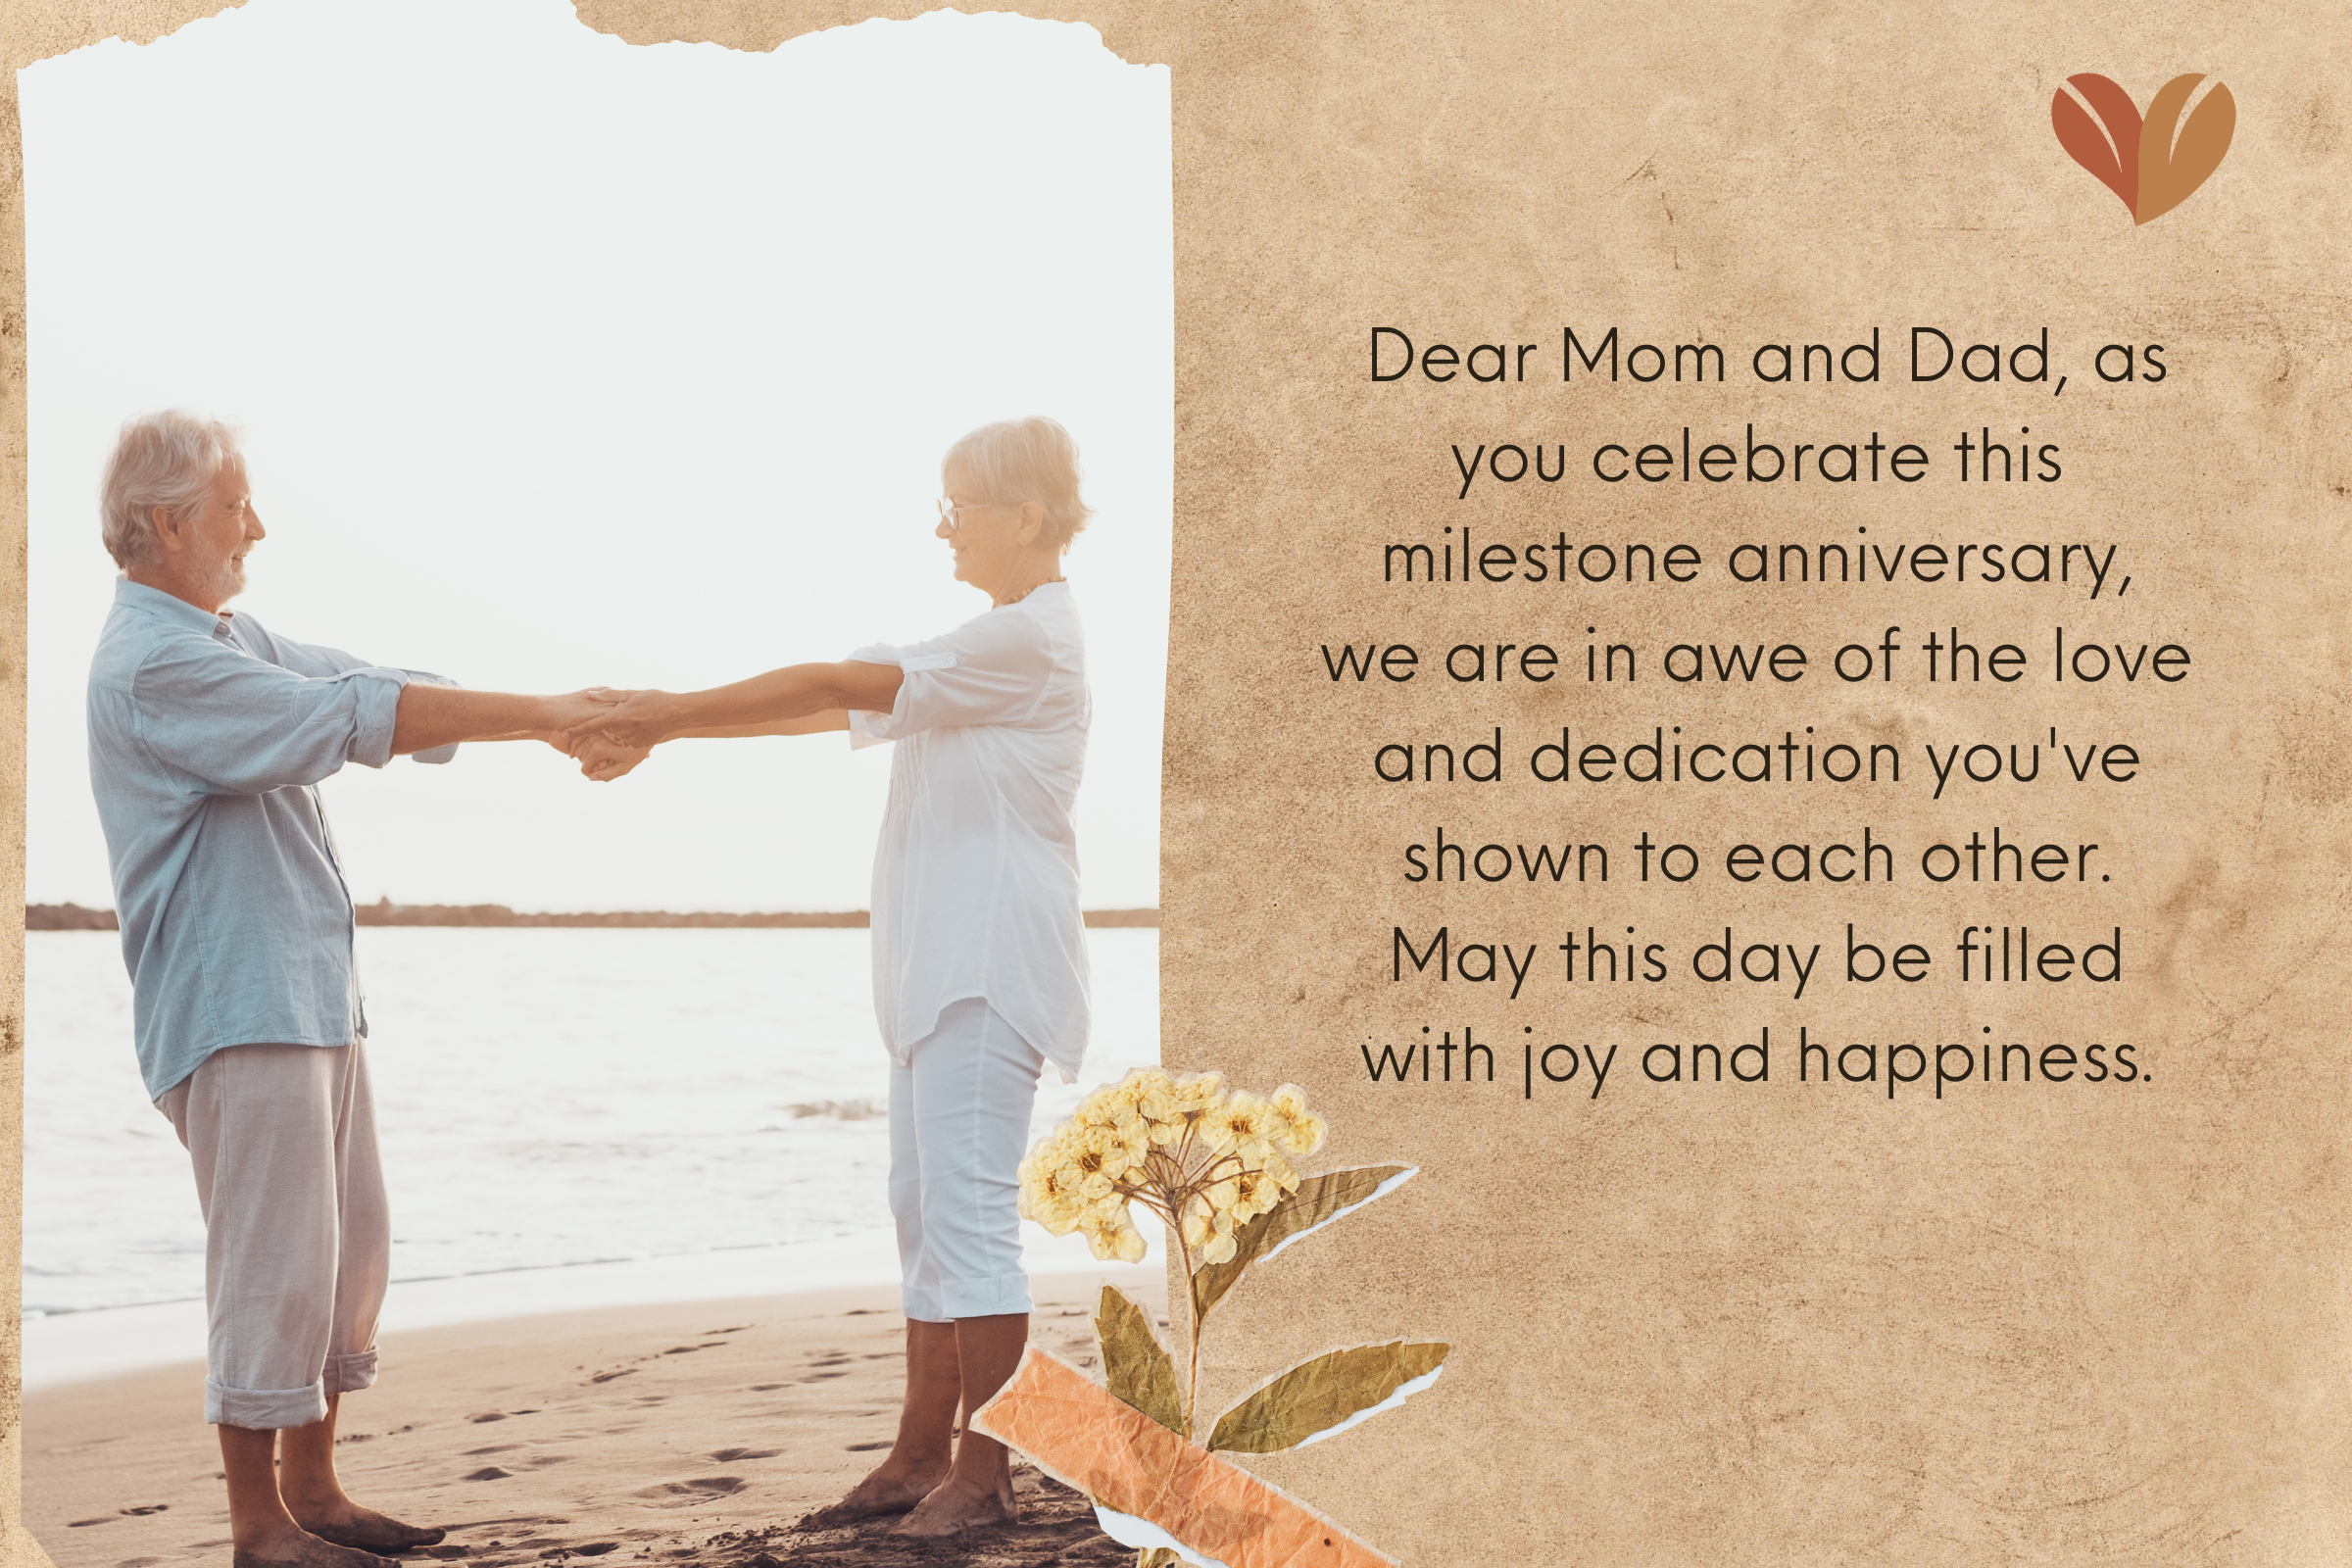 Milestone anniversary quotes for beloved mom and dad...: Happy Anniversary Wishes for Parents